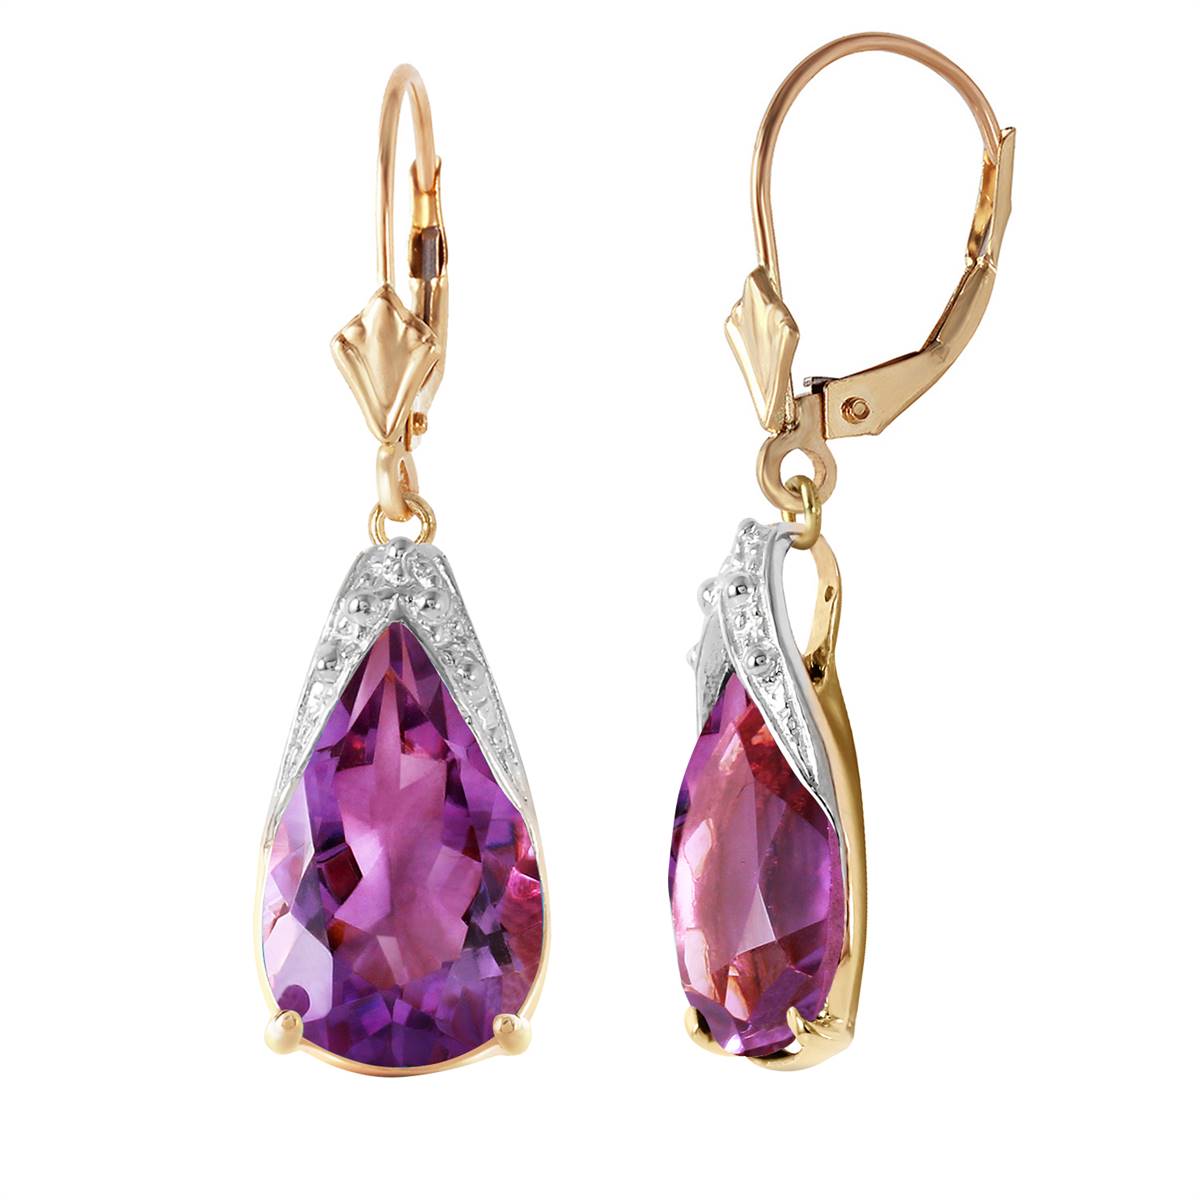 10 Carat 14K Solid Yellow Gold Leverback Earrings Natural Amethyst